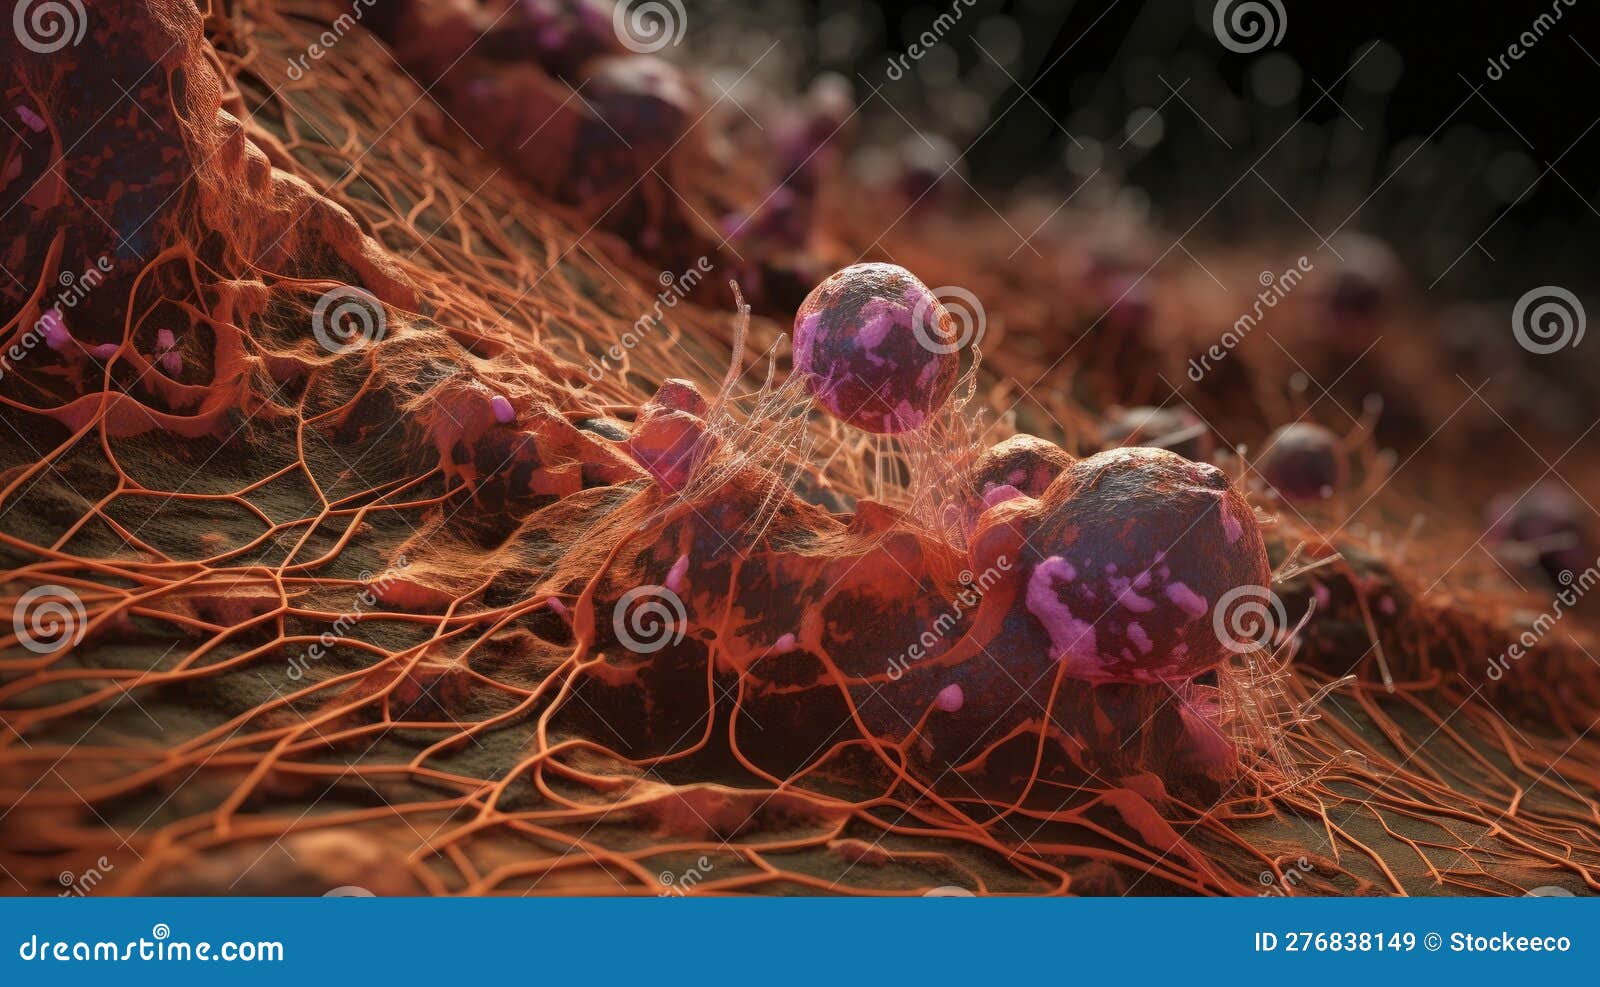 hyper-realistic detail of a1 adrenergic receptor communication under microscope